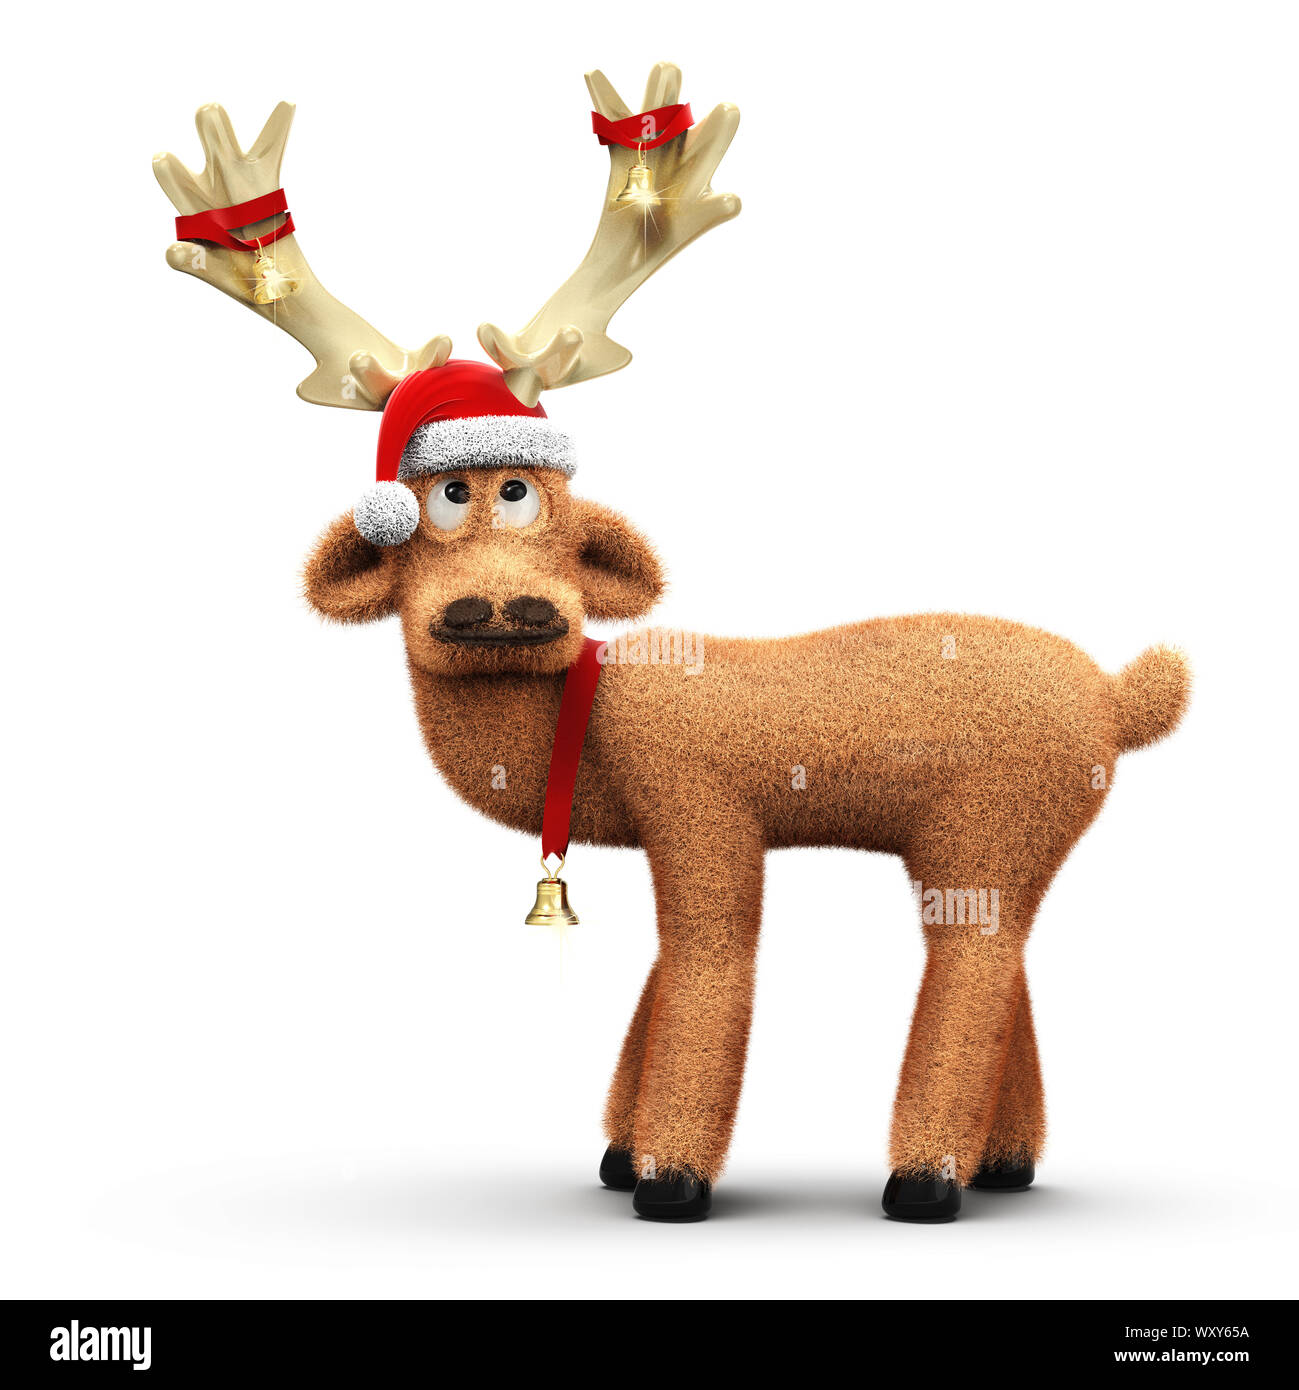 Funny reindeer with Santa Claus hat and decoration on the antler isolated on white background 3D rendering Stock Photo